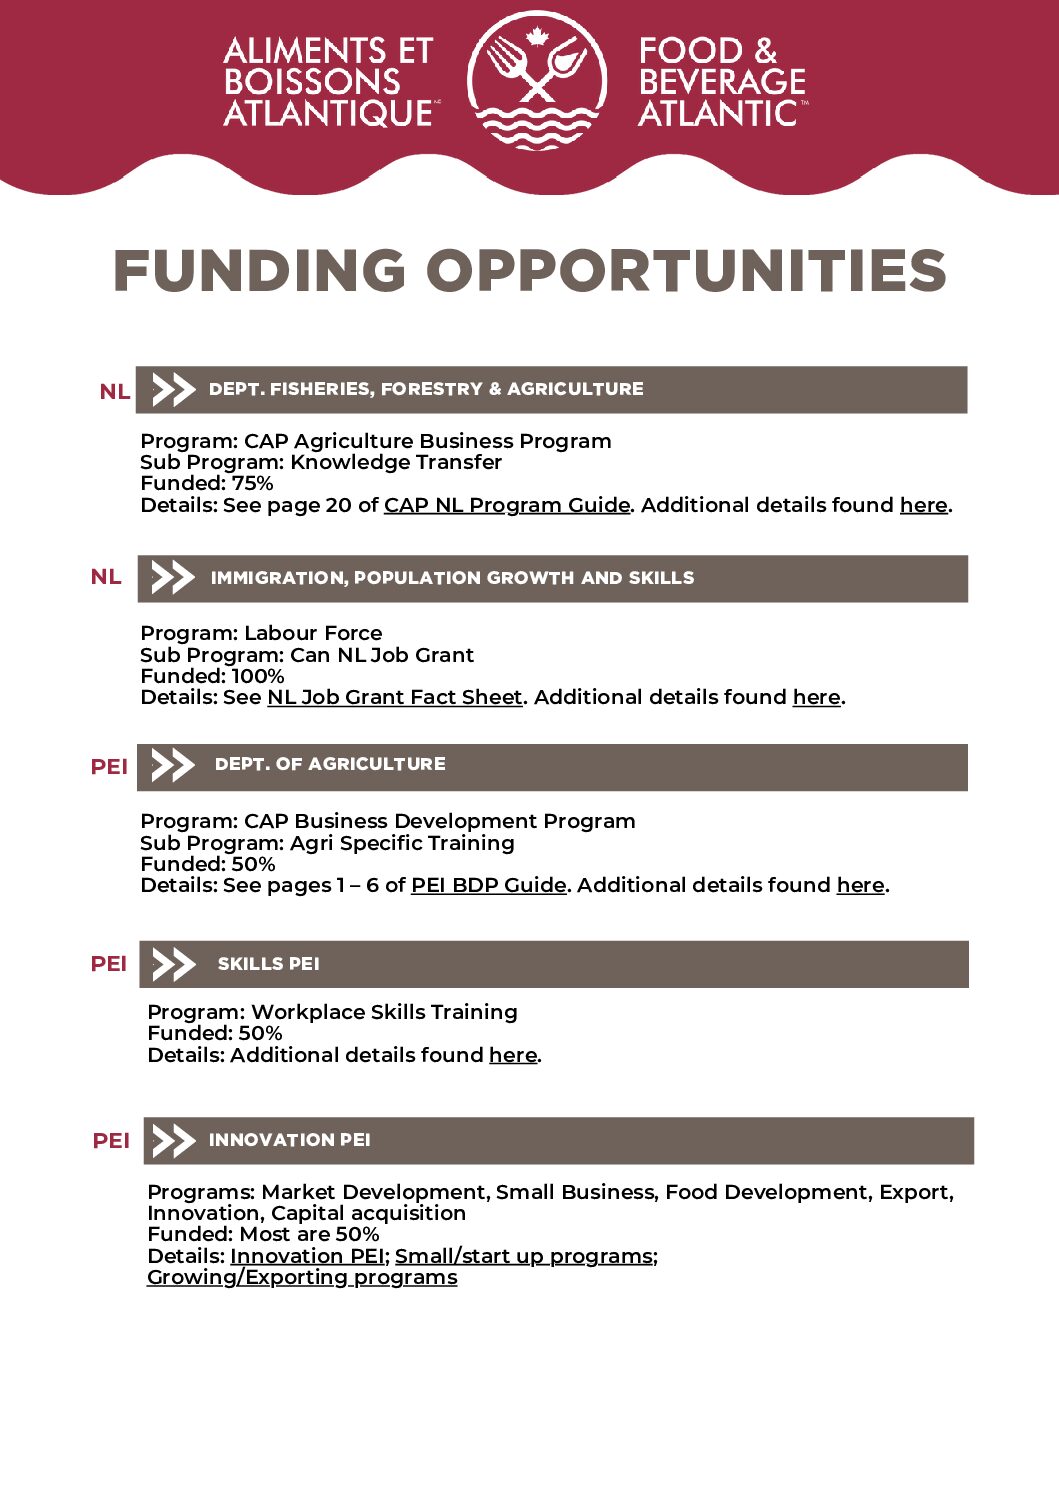 Current funding opportunities